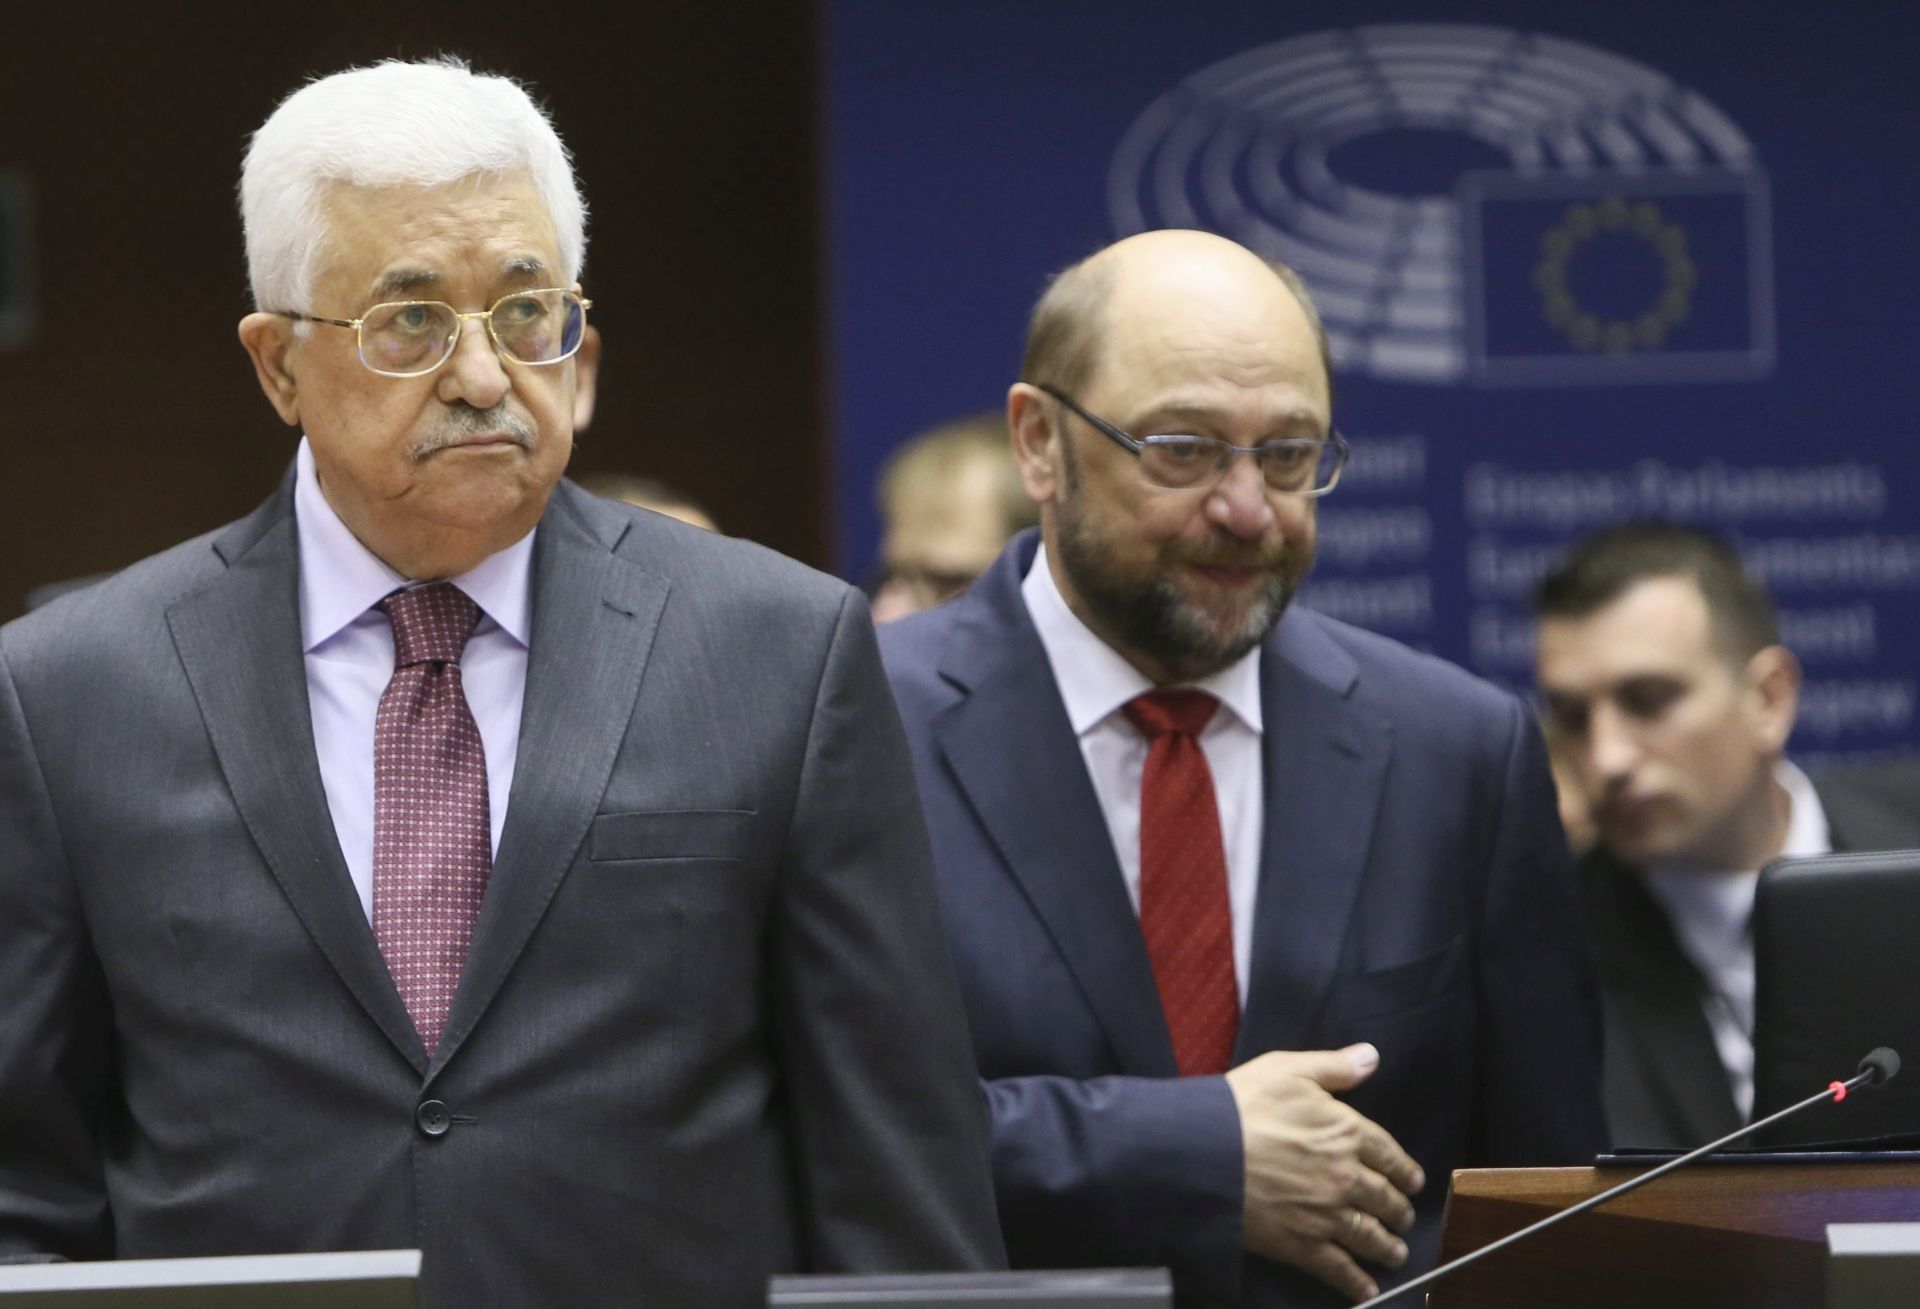 epa05385424 The President of the Palestinian Authority Mahmoud Abbas (L) and the President of the European Parliament, Martin Schulz (C) arrive for a small plenary session of the European Parliament in Brussels, Belgium, 23 June 2016. Abbas currently is on a visit to the European institutions in Brussels.  EPA/OLIVIER HOSLET